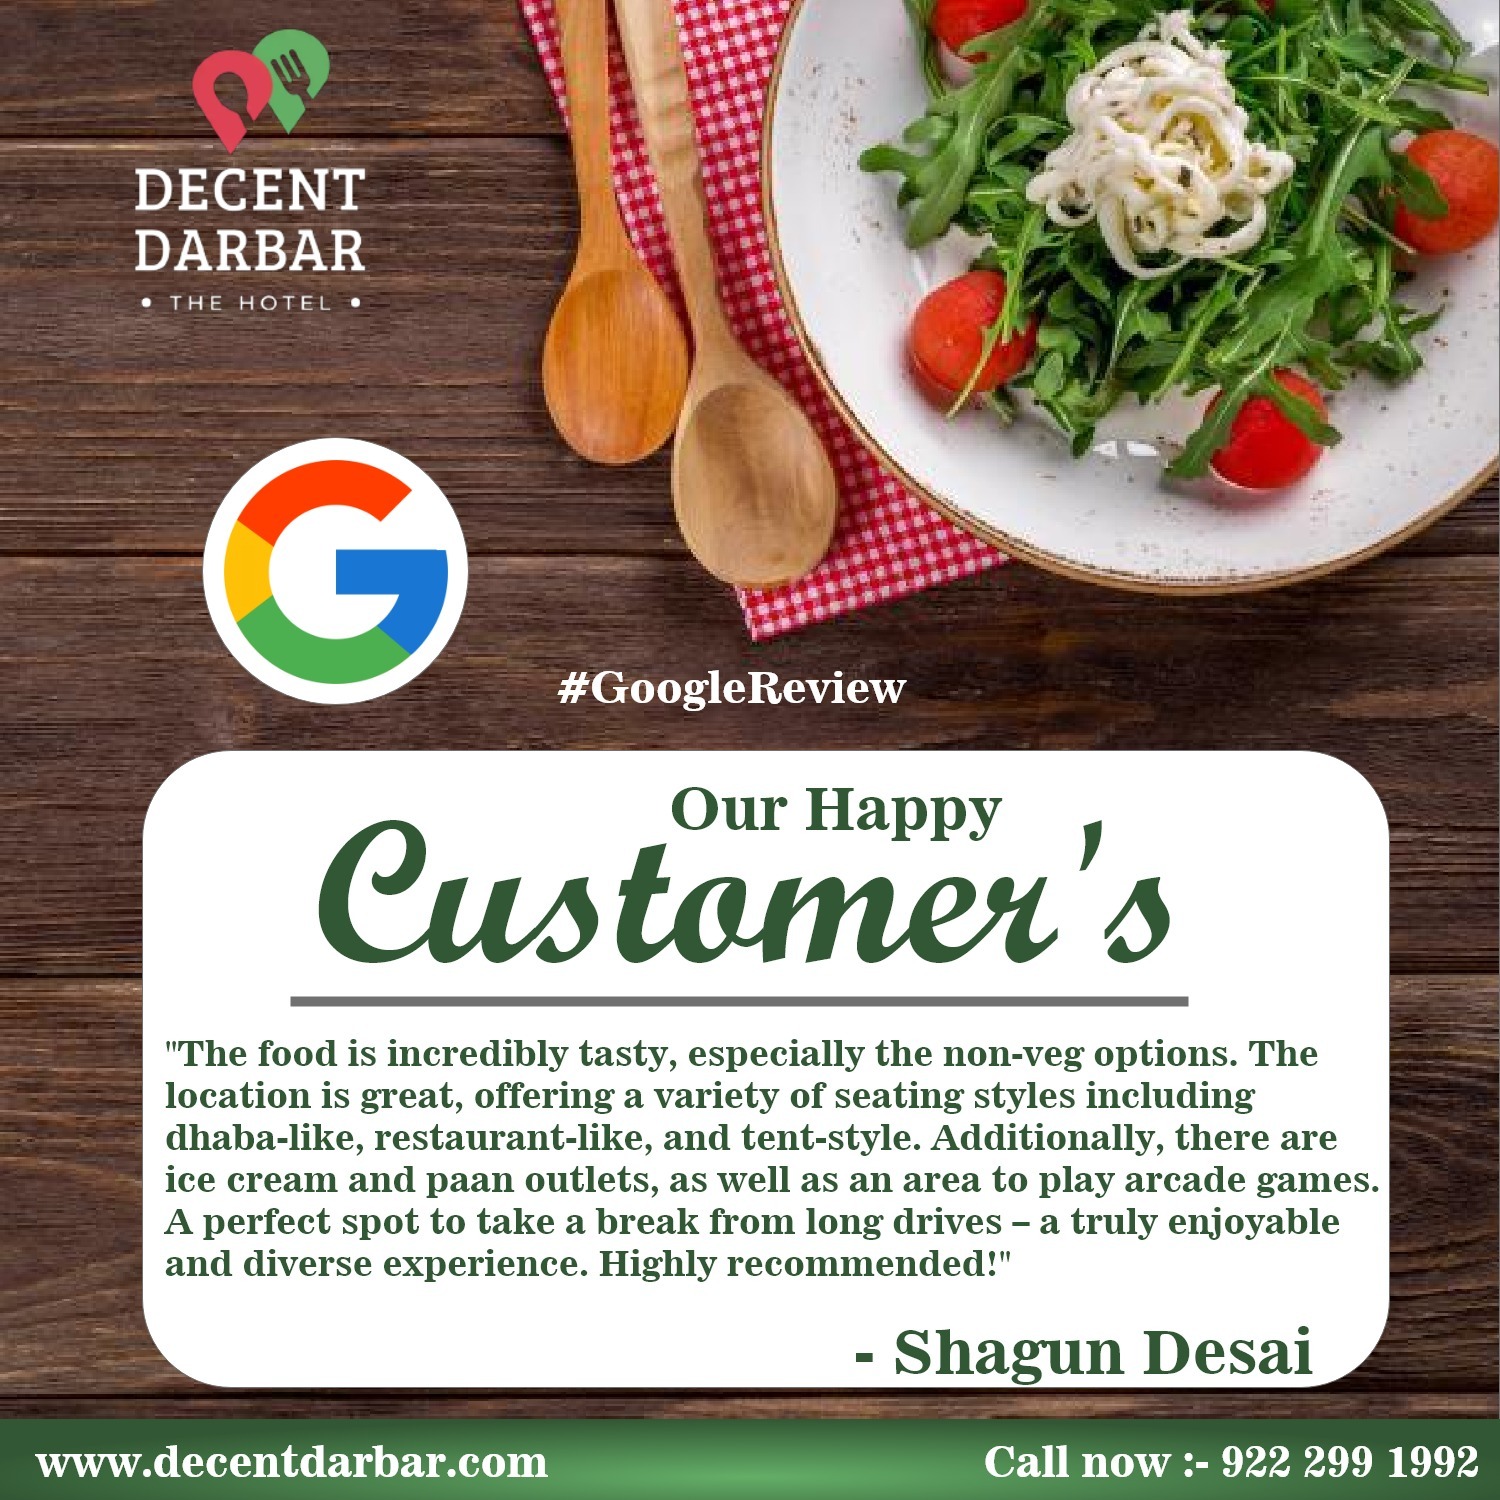 Indulge in excellence at Decent Darbar! 🍽️✨ Your 